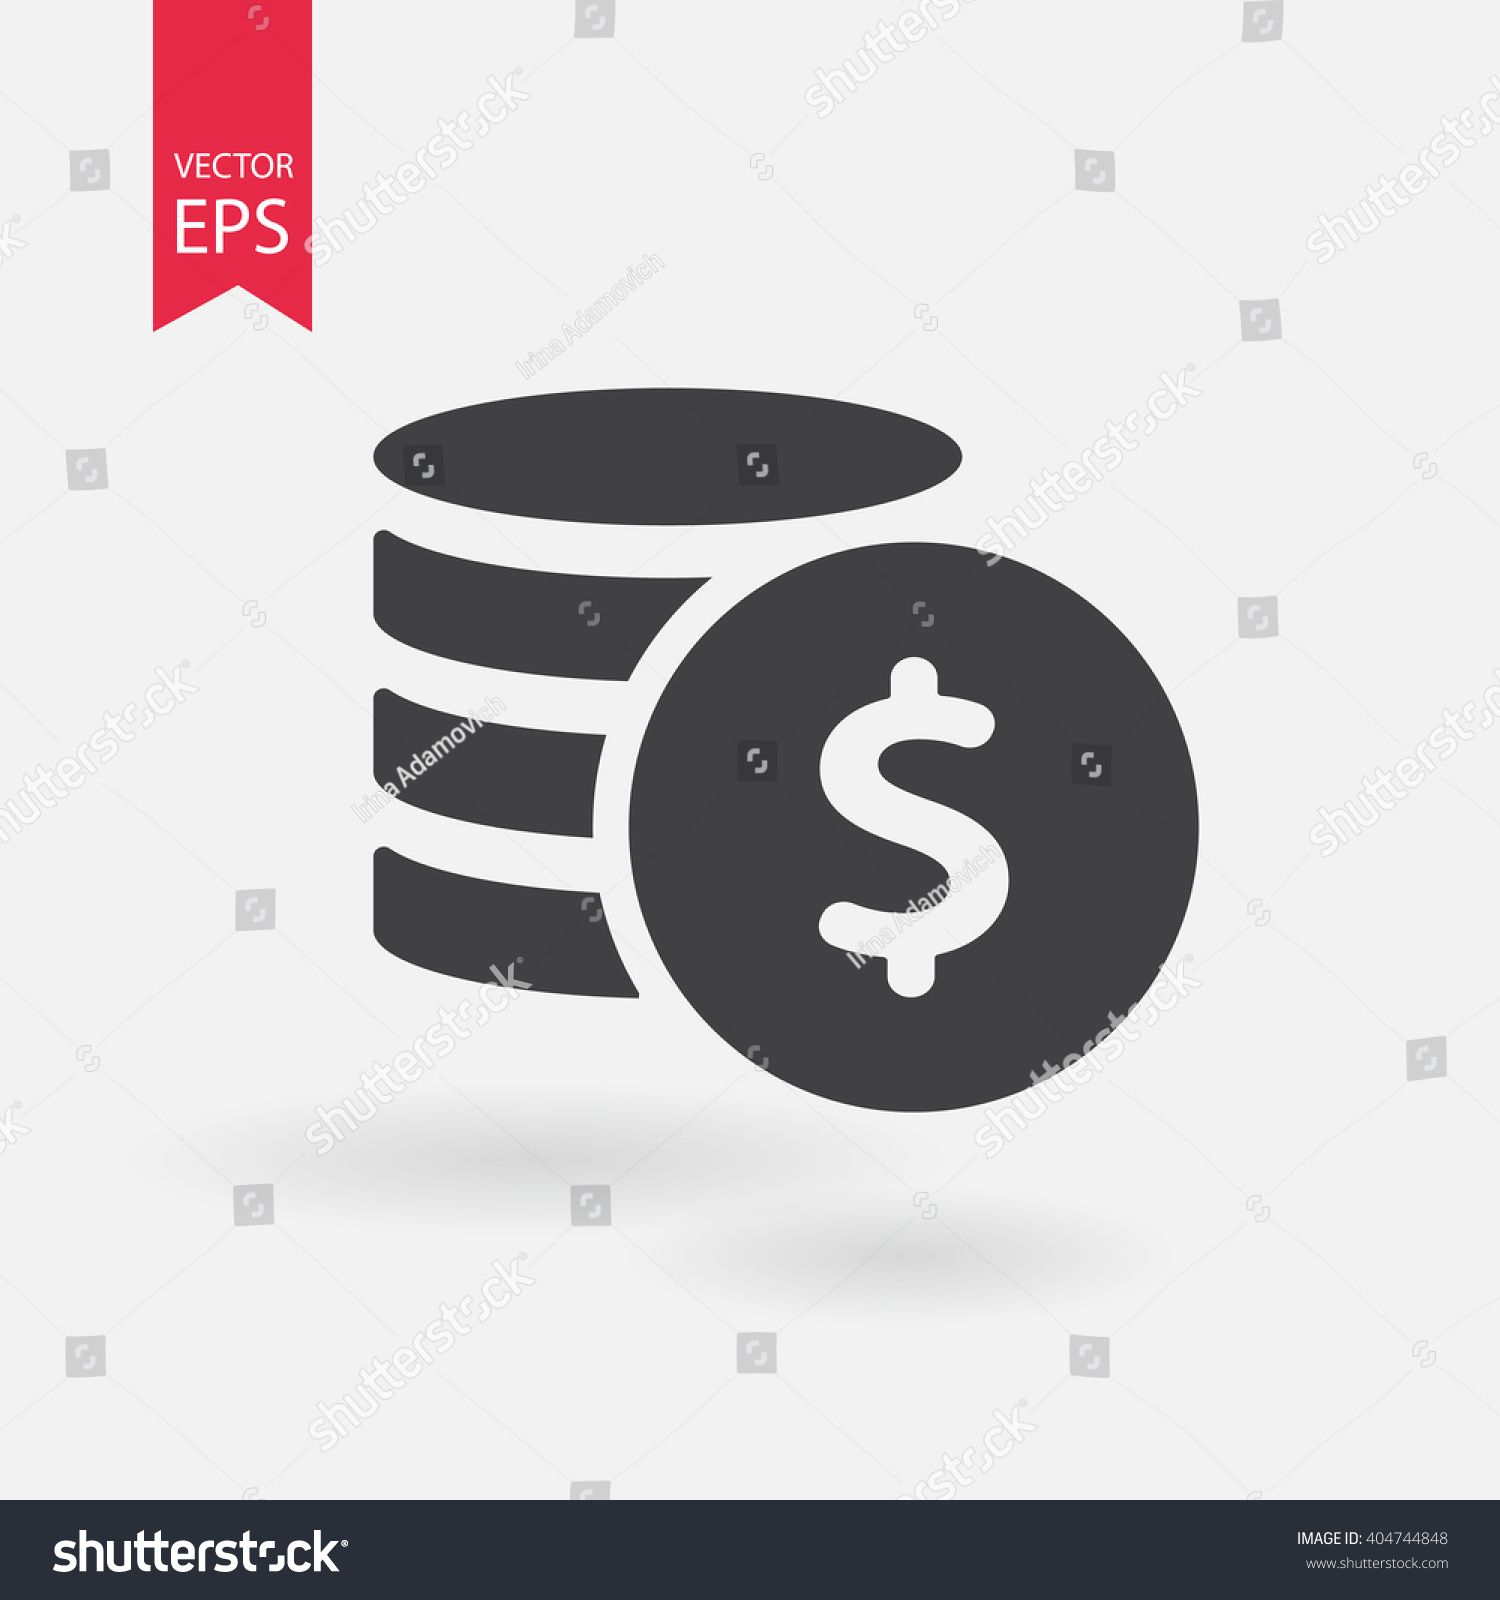 Money. Line Icon Vector. Payment system. Coins and Dollar cent Sign isolated on white background. Flat design style. Business concept. #404744848